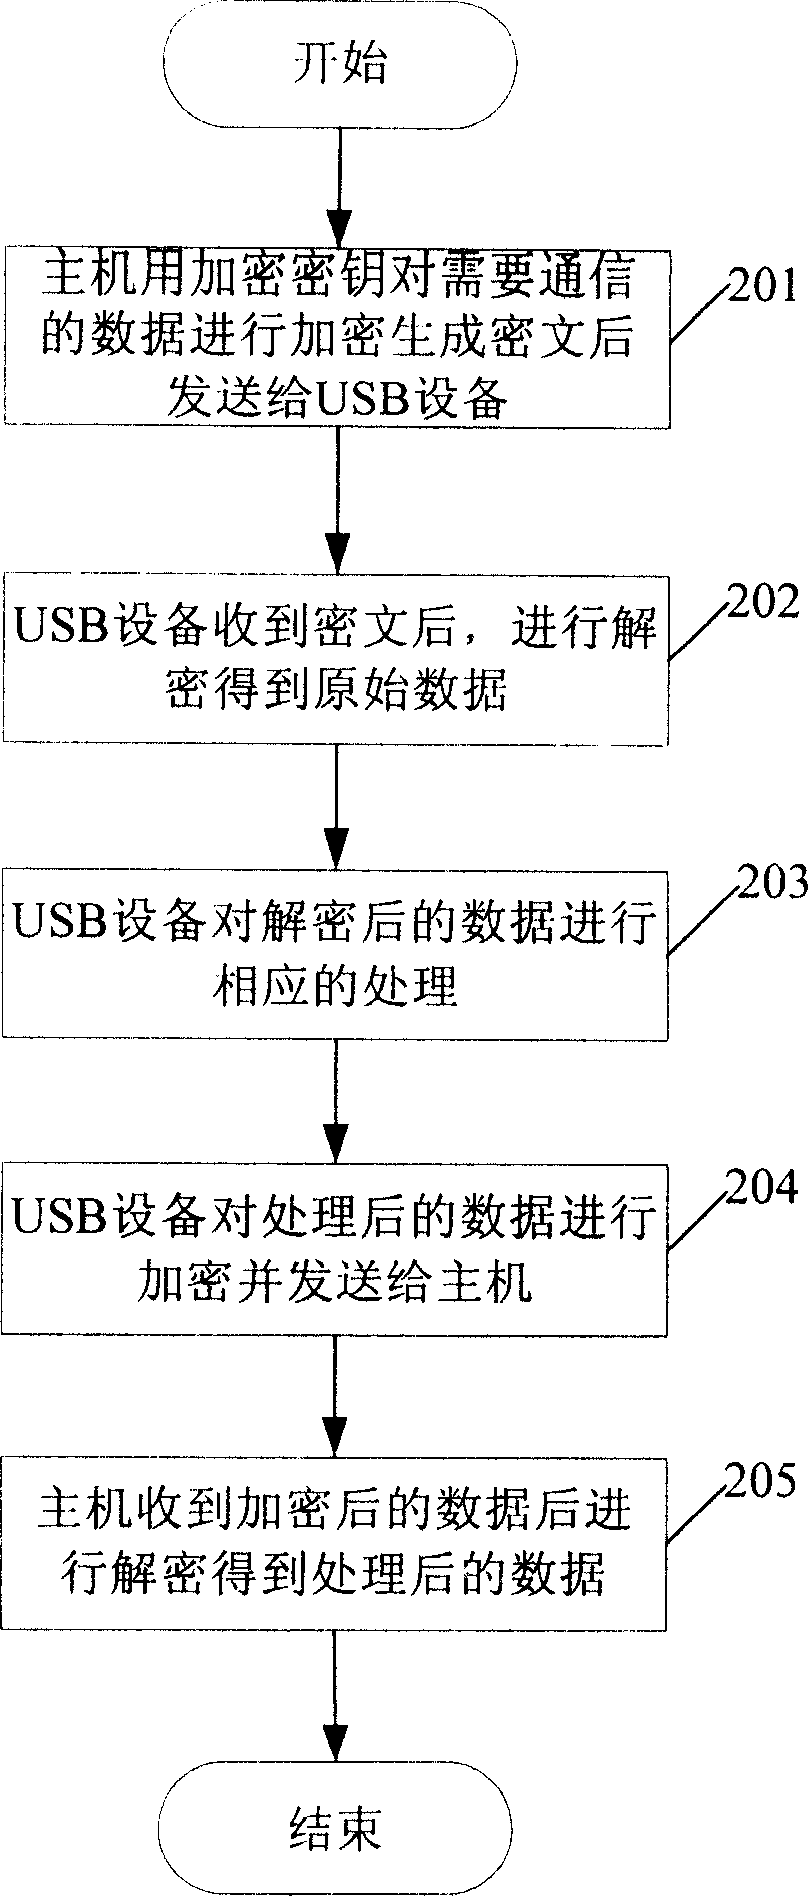 Method and equipment for carrying out safety communication between USB device and host